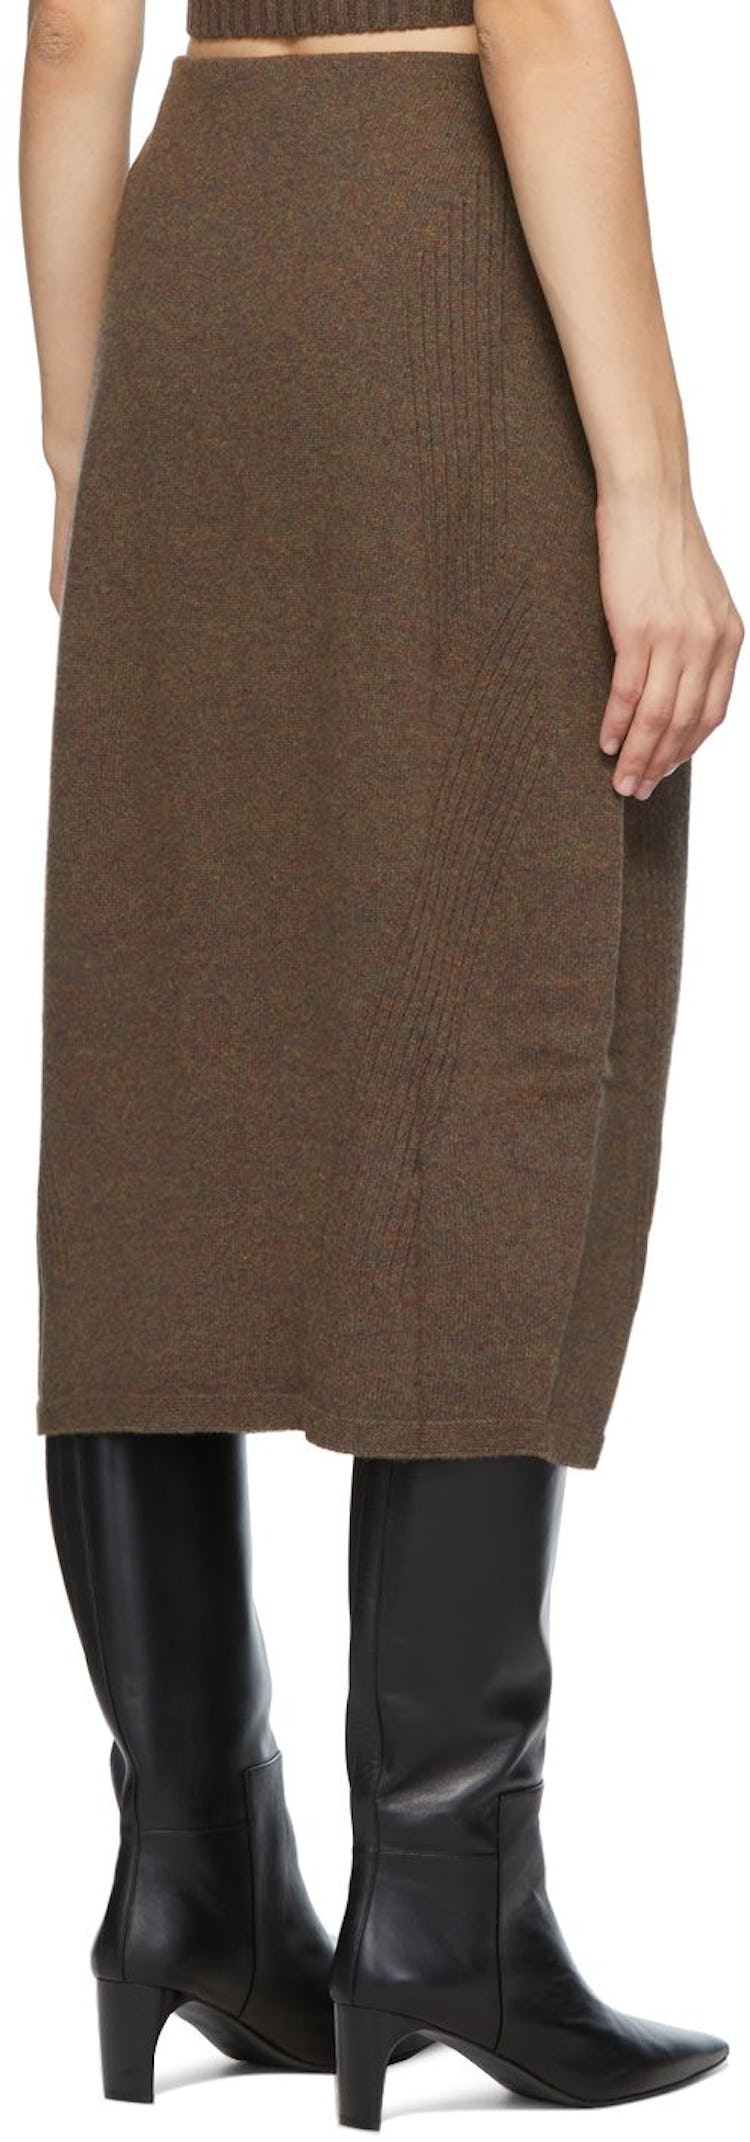 Wool Wholegarment Cocoon Skirt: additional image